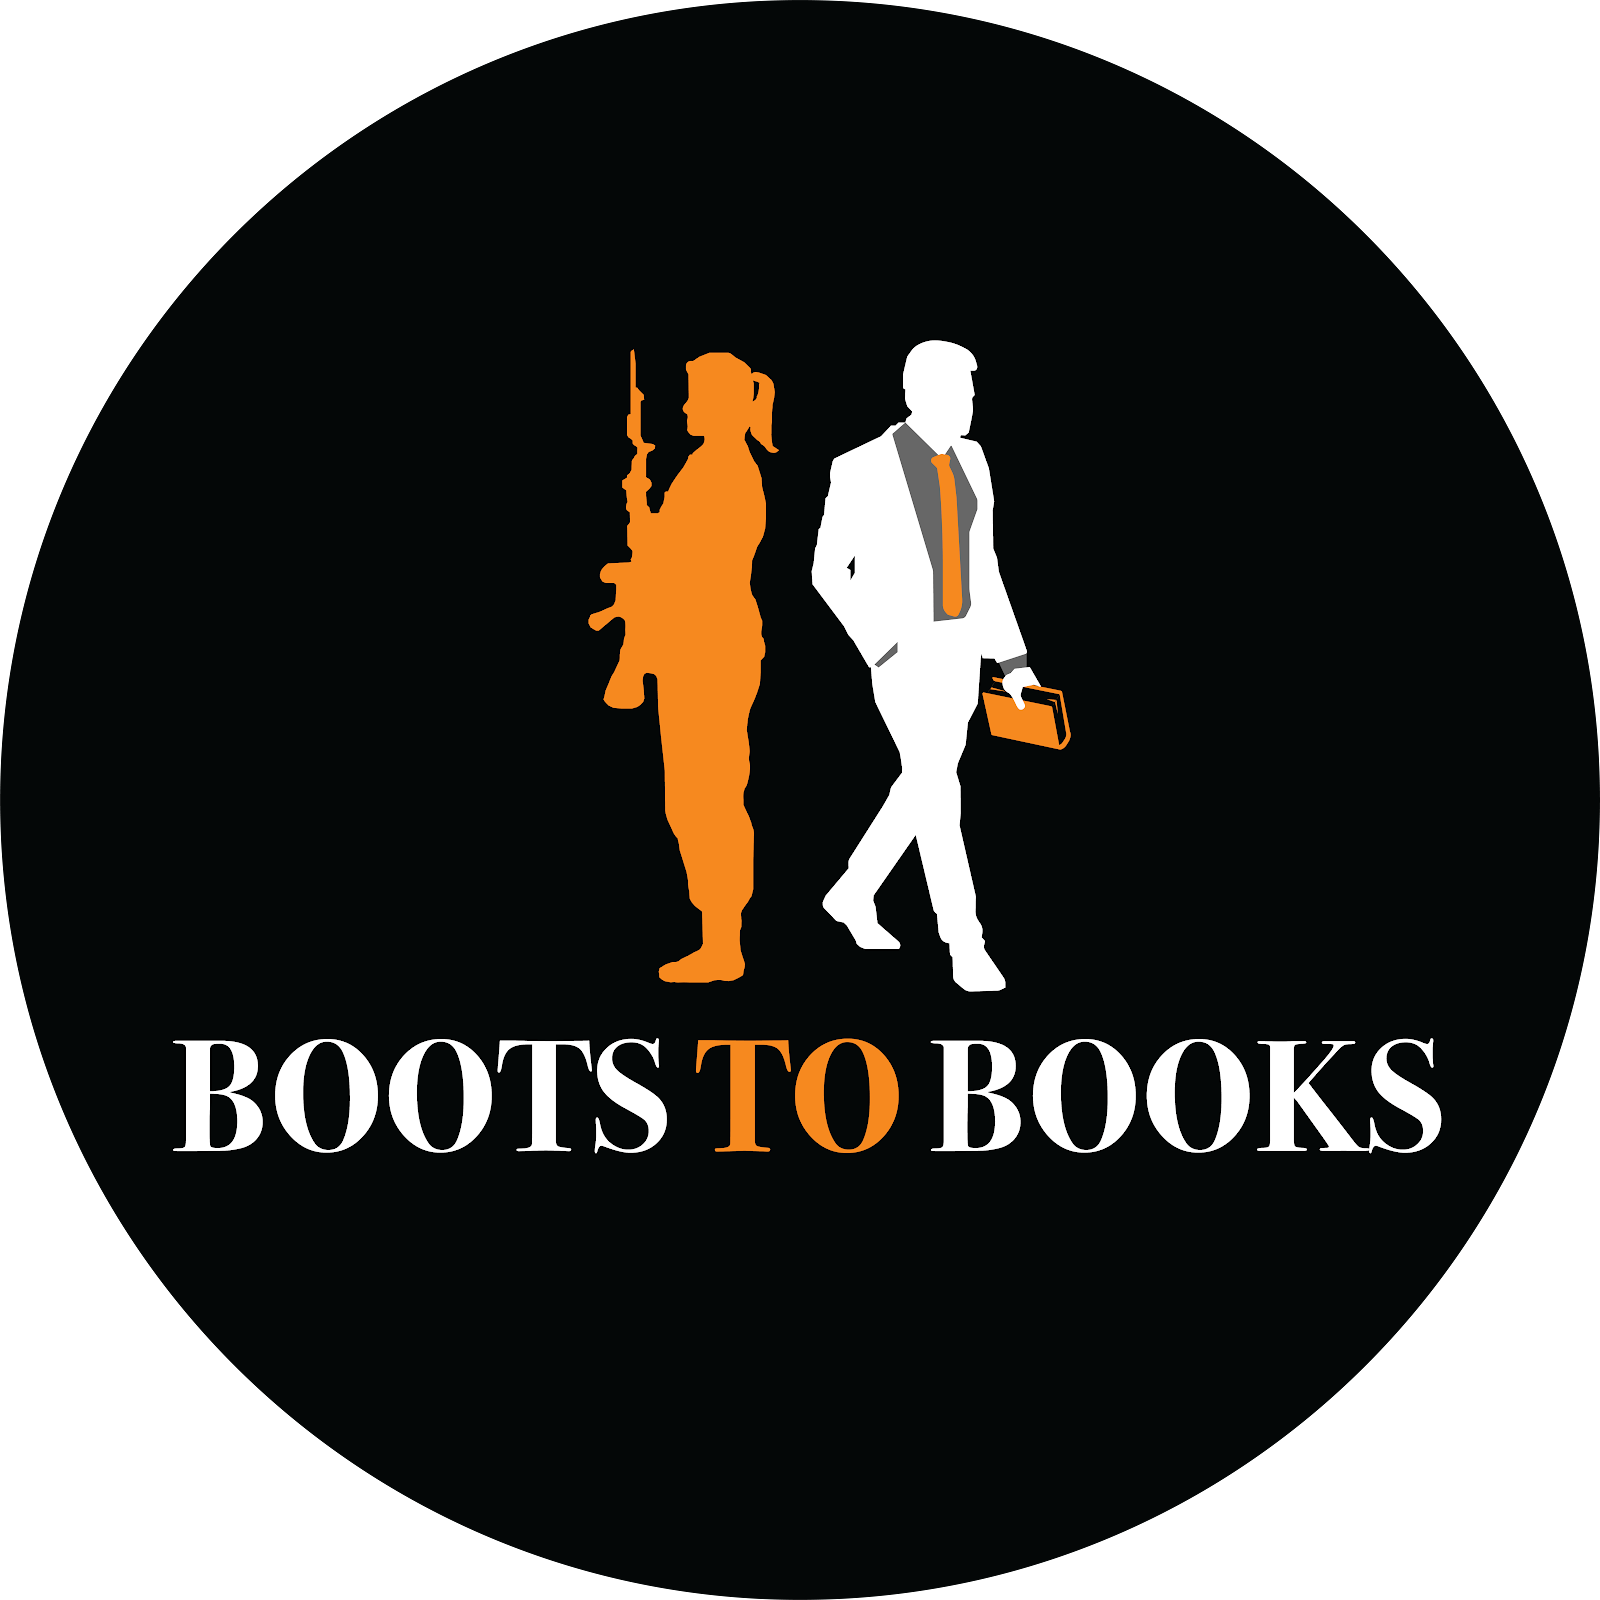 Boots to Books Partnership with GMAT